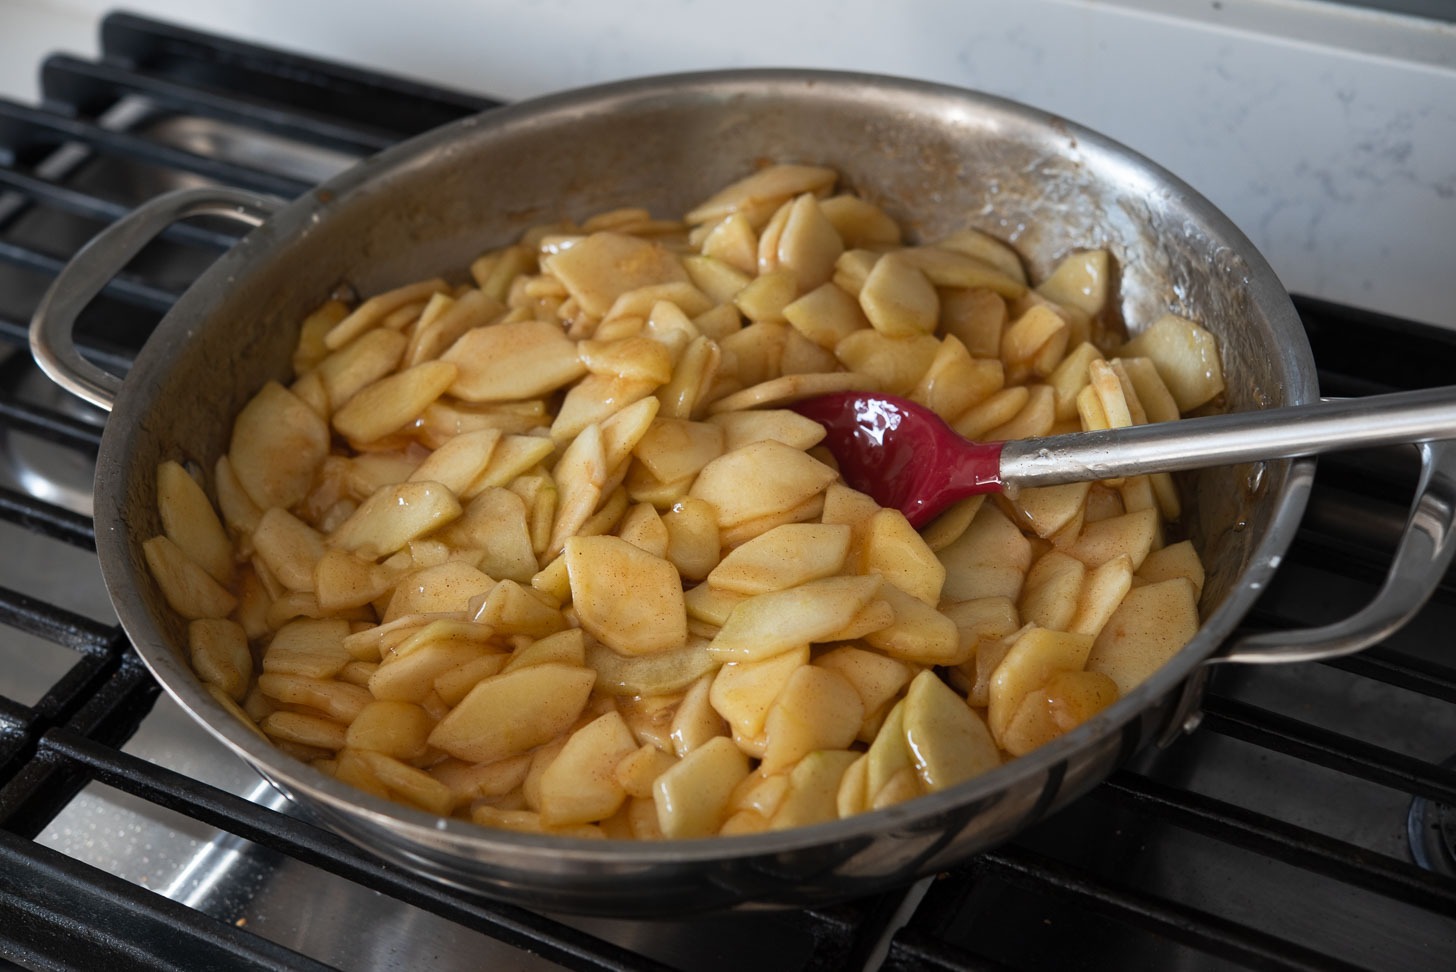 The apple filling is cooked until soft and thickened.